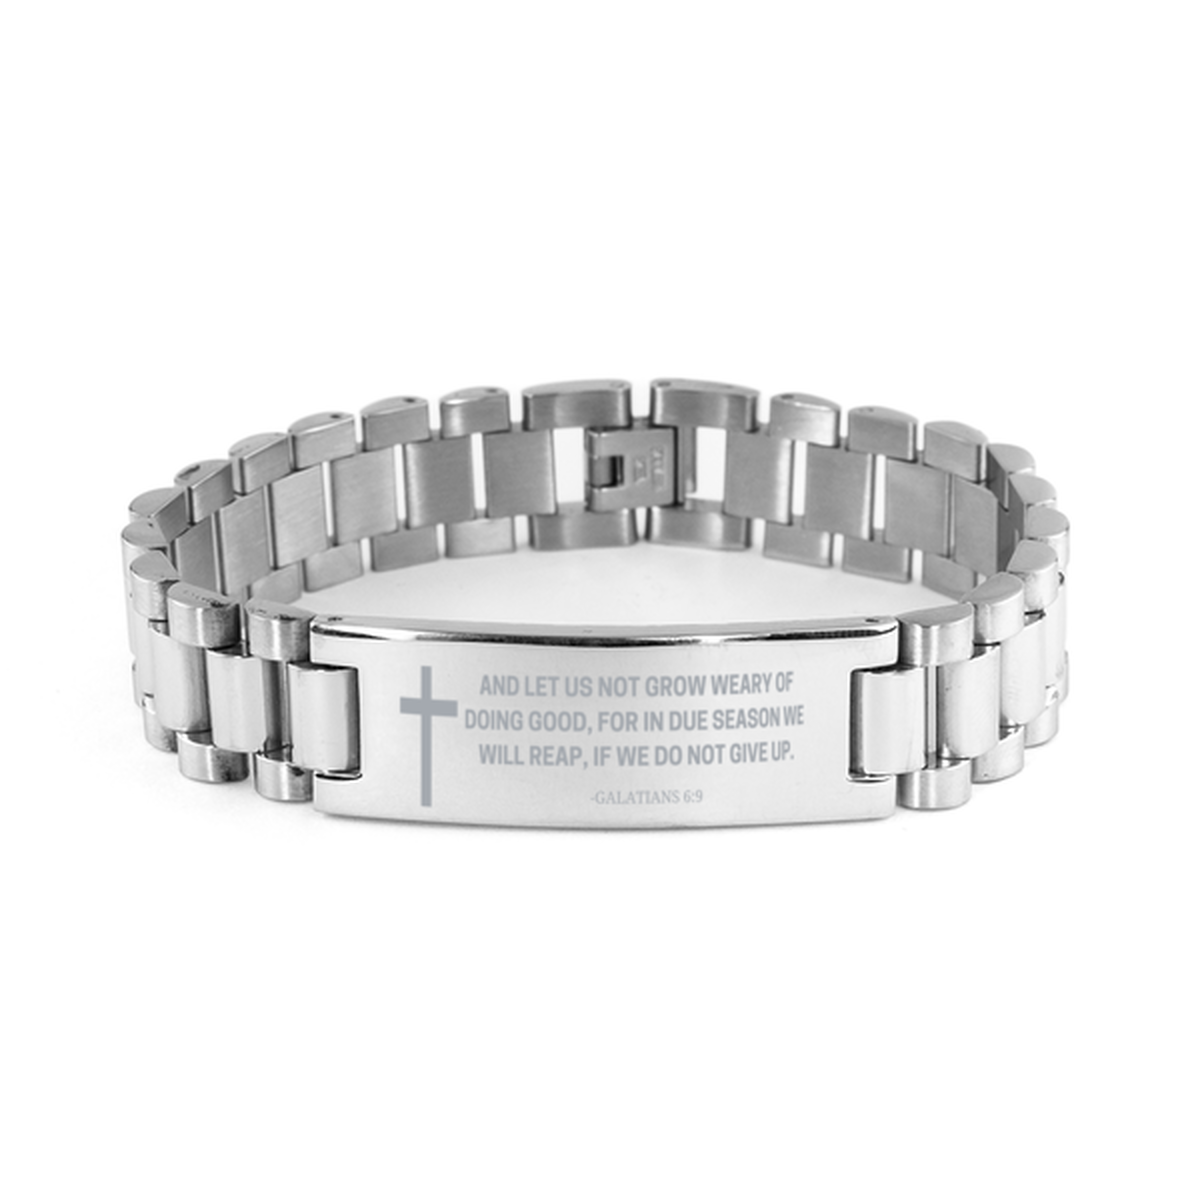 Baptism Gifts For Teenage Boys Girls, Christian Bible Verse Ladder Stainless Steel Bracelet, And let us not grow weary, Catholic Confirmation Gifts for Son, Godson, Grandson, Nephew